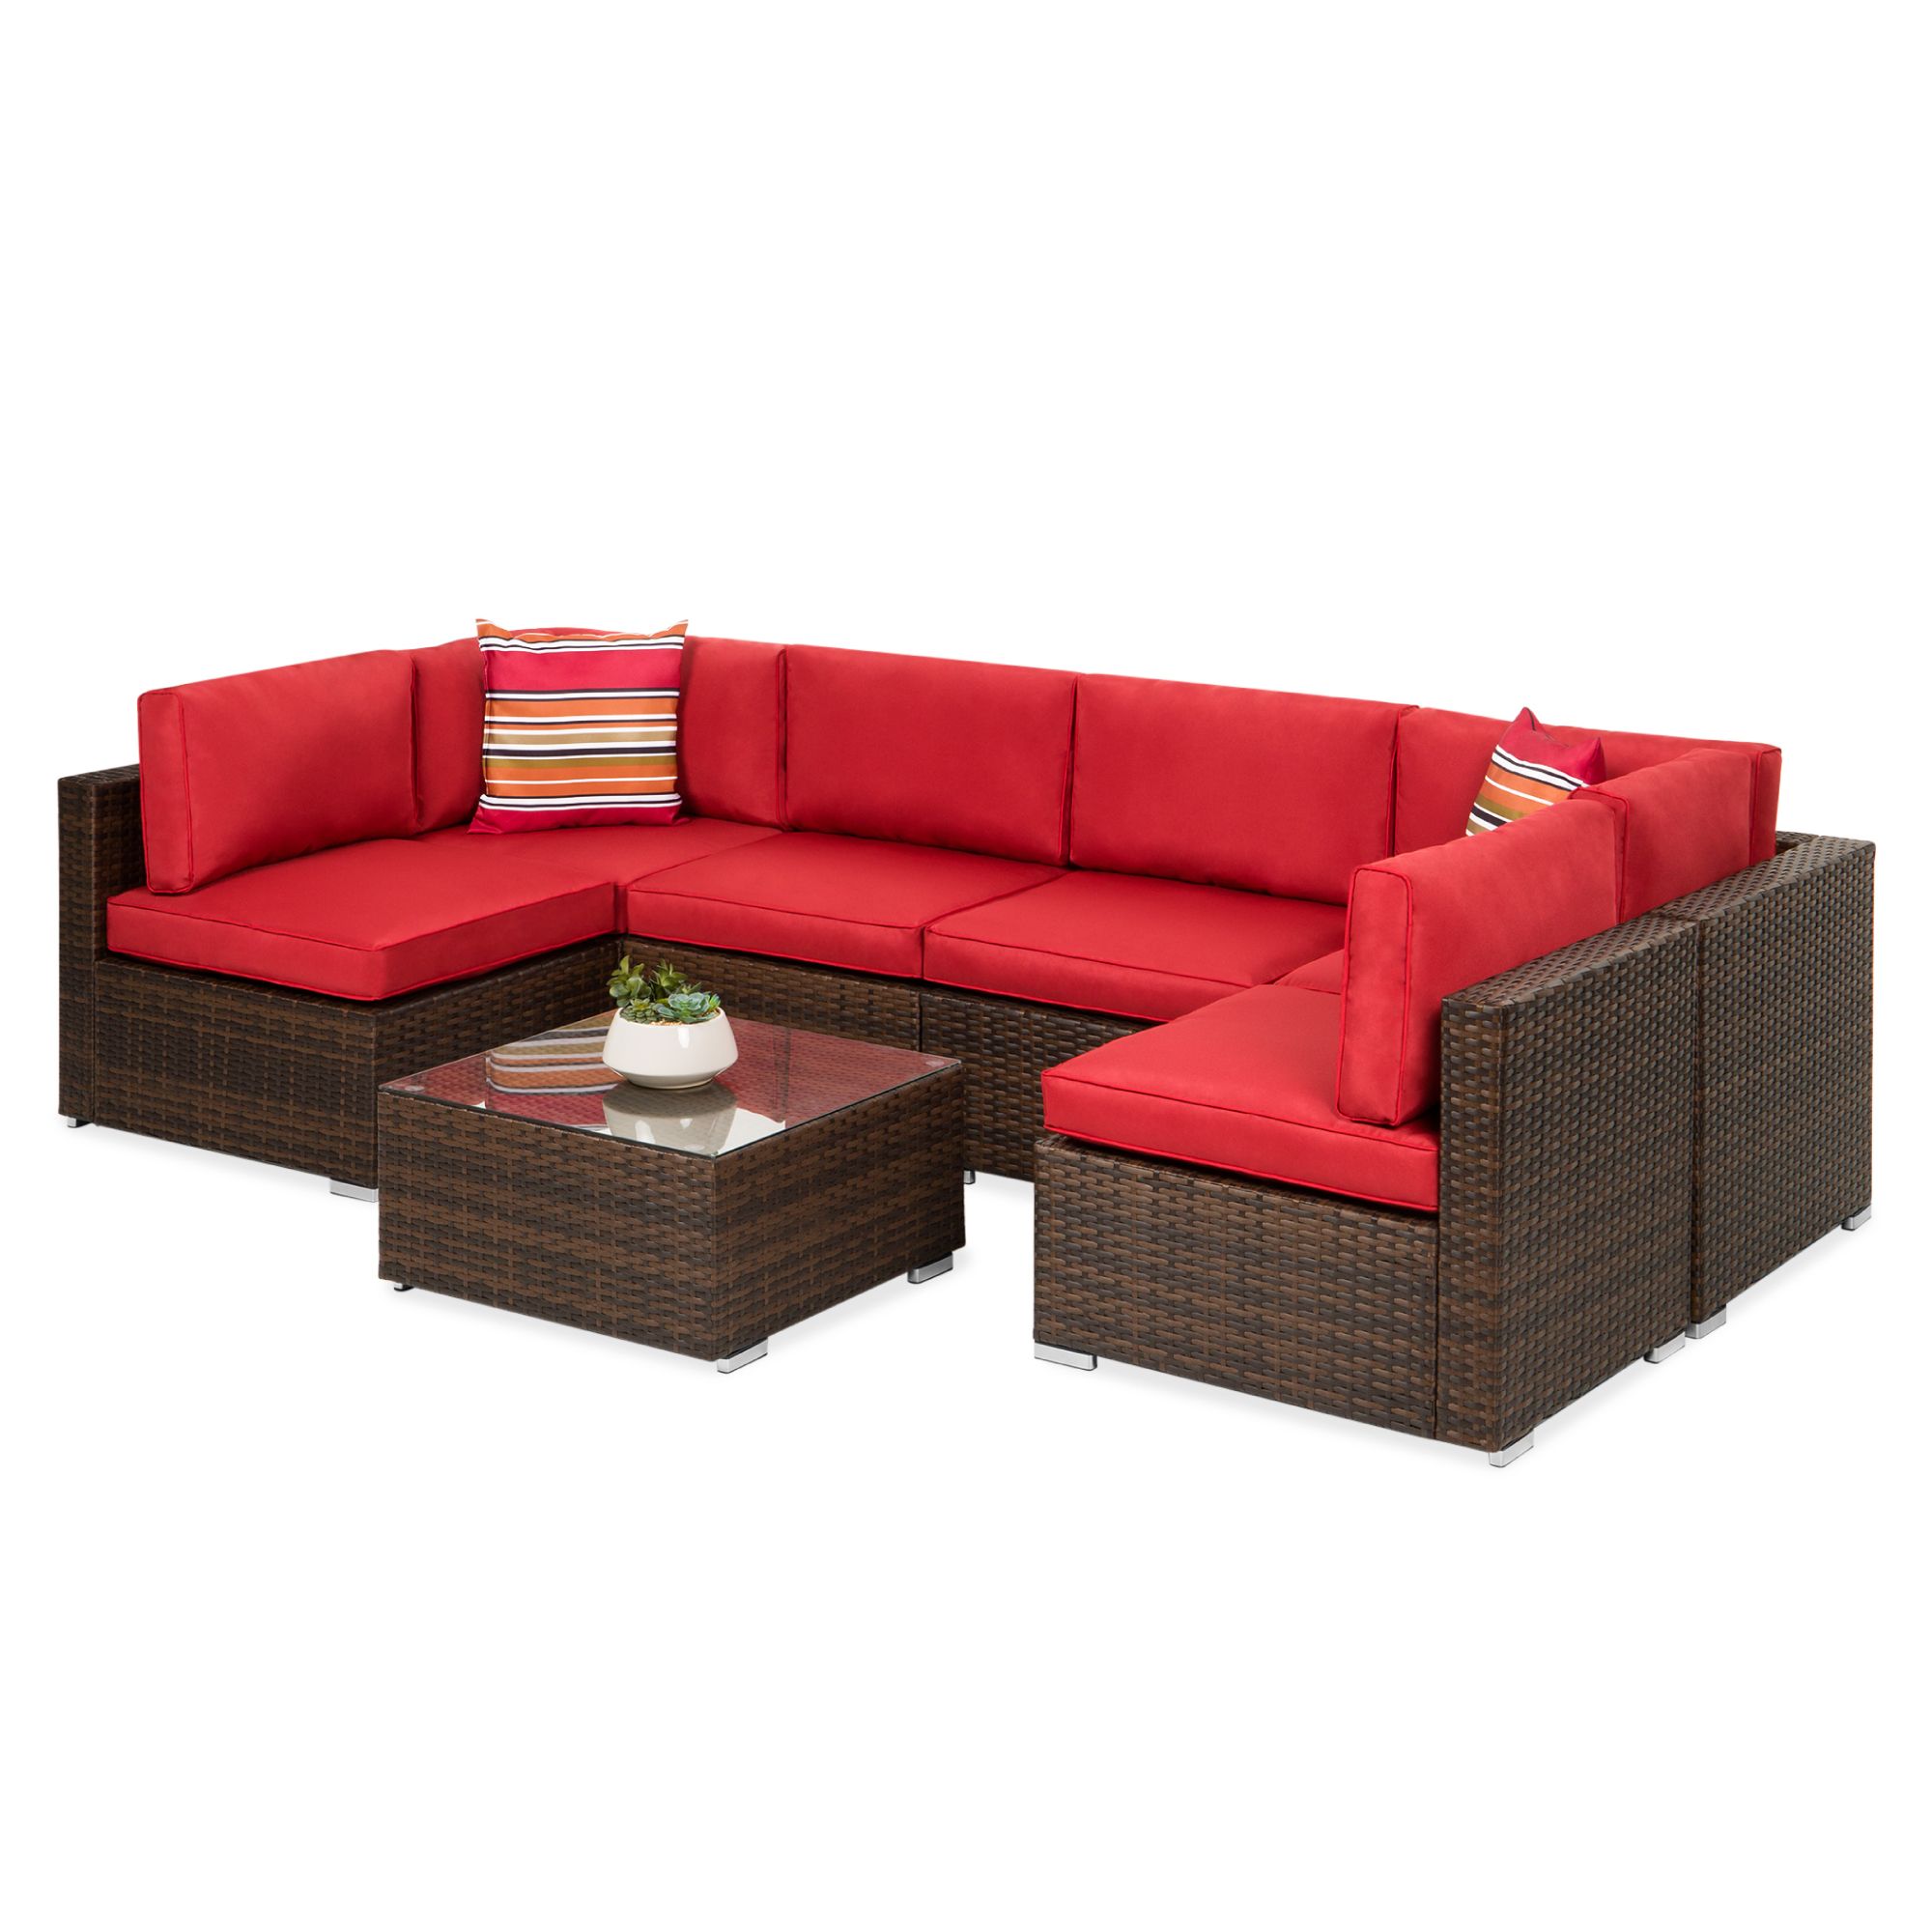 Best And Newest Best Choice Products 7 Piece Modular Outdoor Conversational Furniture Throughout Rustic Brown Sectional Corner Desks (View 11 of 15)